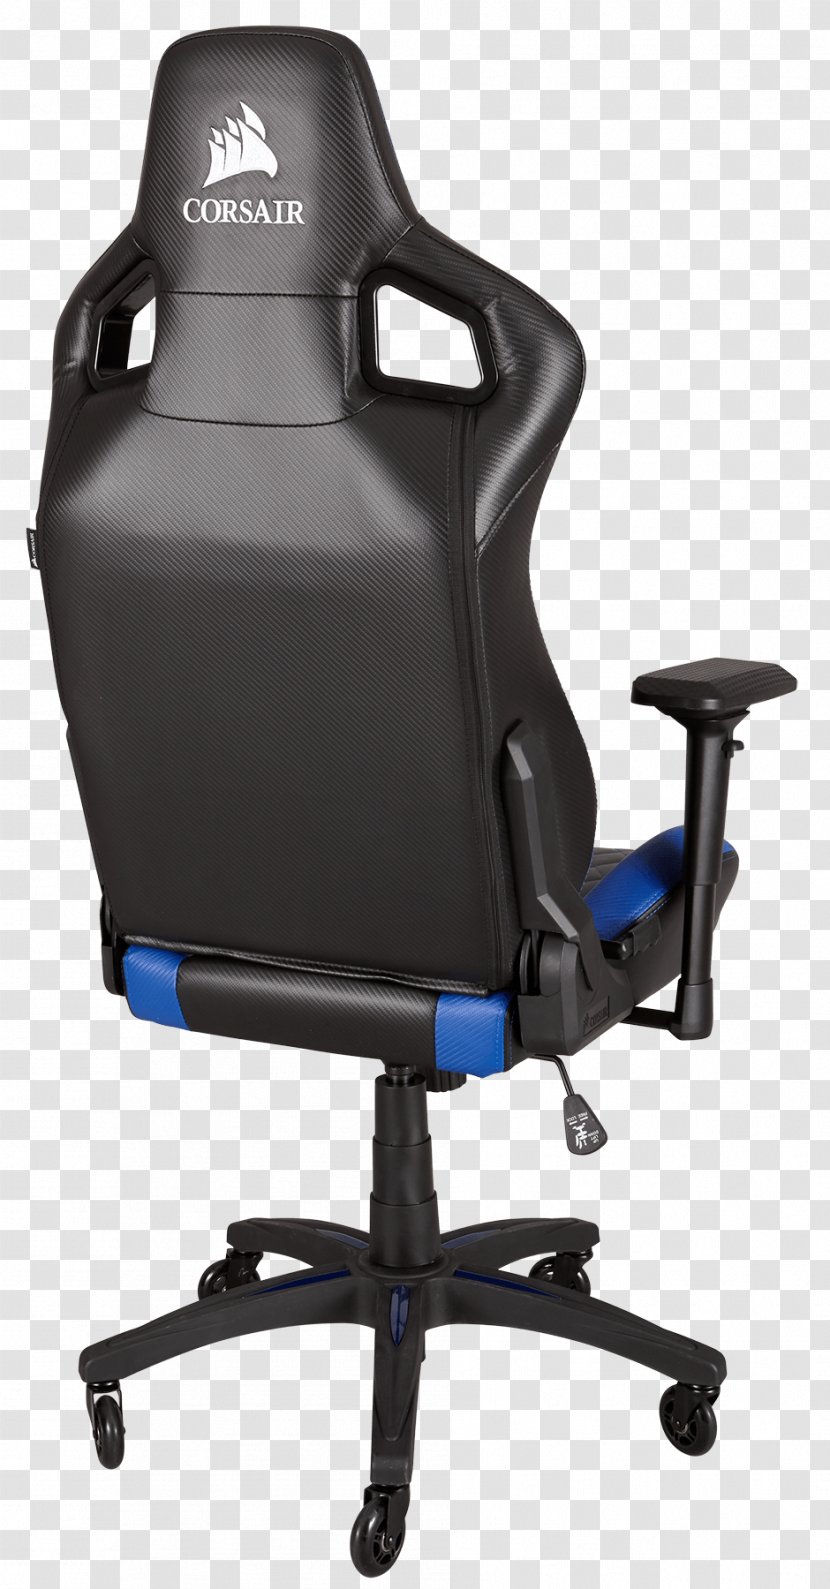 Gaming Chair Corsair Components Video Games Office & Desk Chairs - Computer - Skeleton Driving Transparent PNG